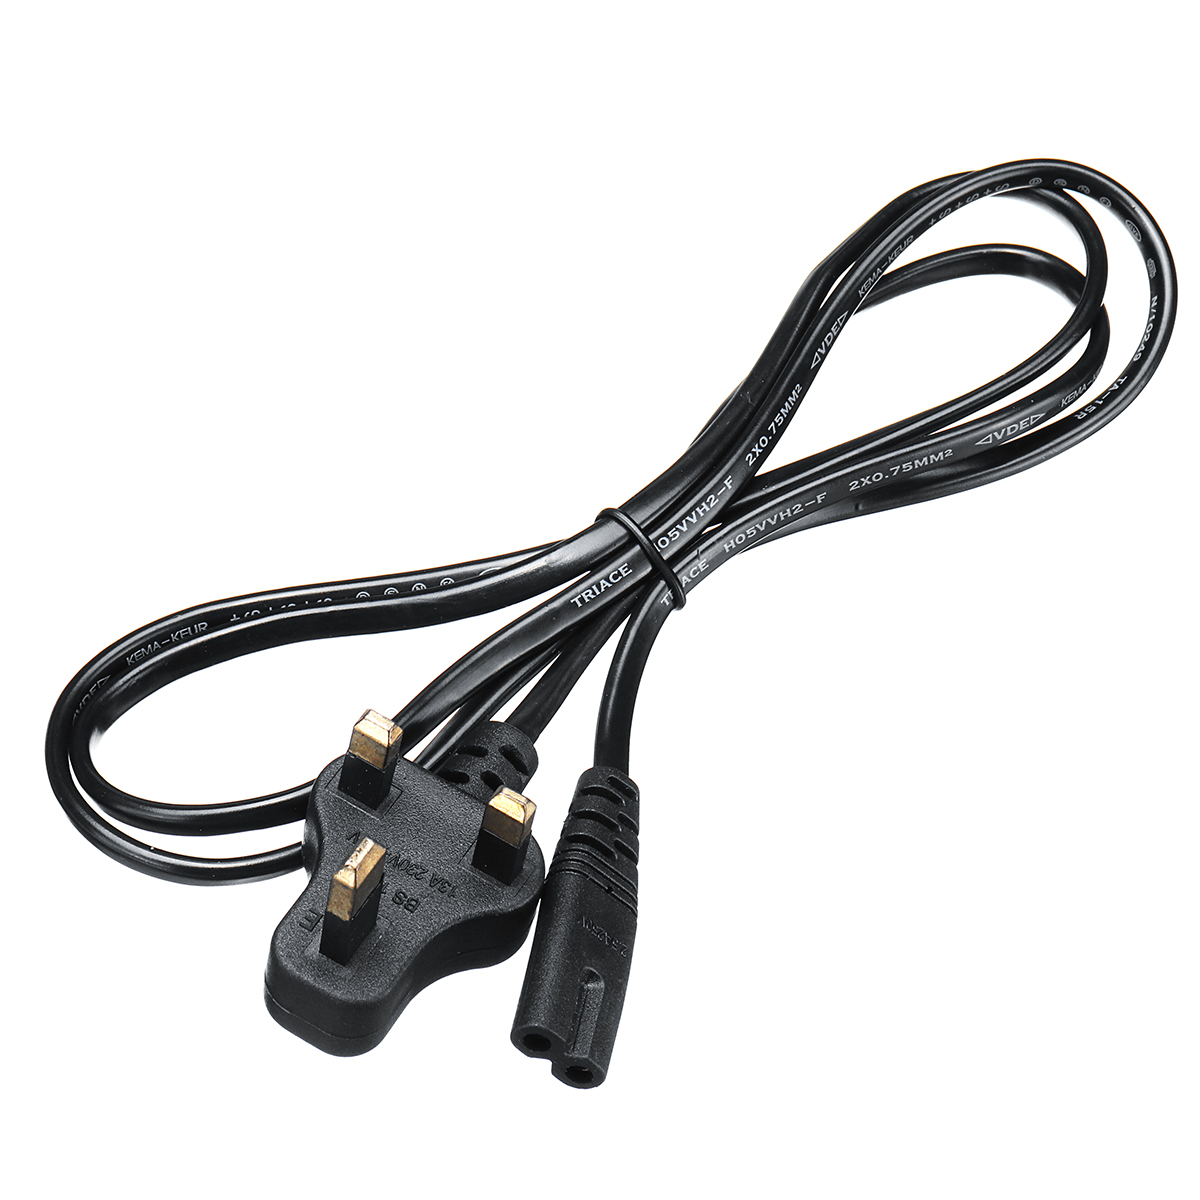 42V-2A-Power-Adapter-Battery-Charger-For-2-Wheel-Electric-Balance-Scooter-UK-Plug-1368826-8